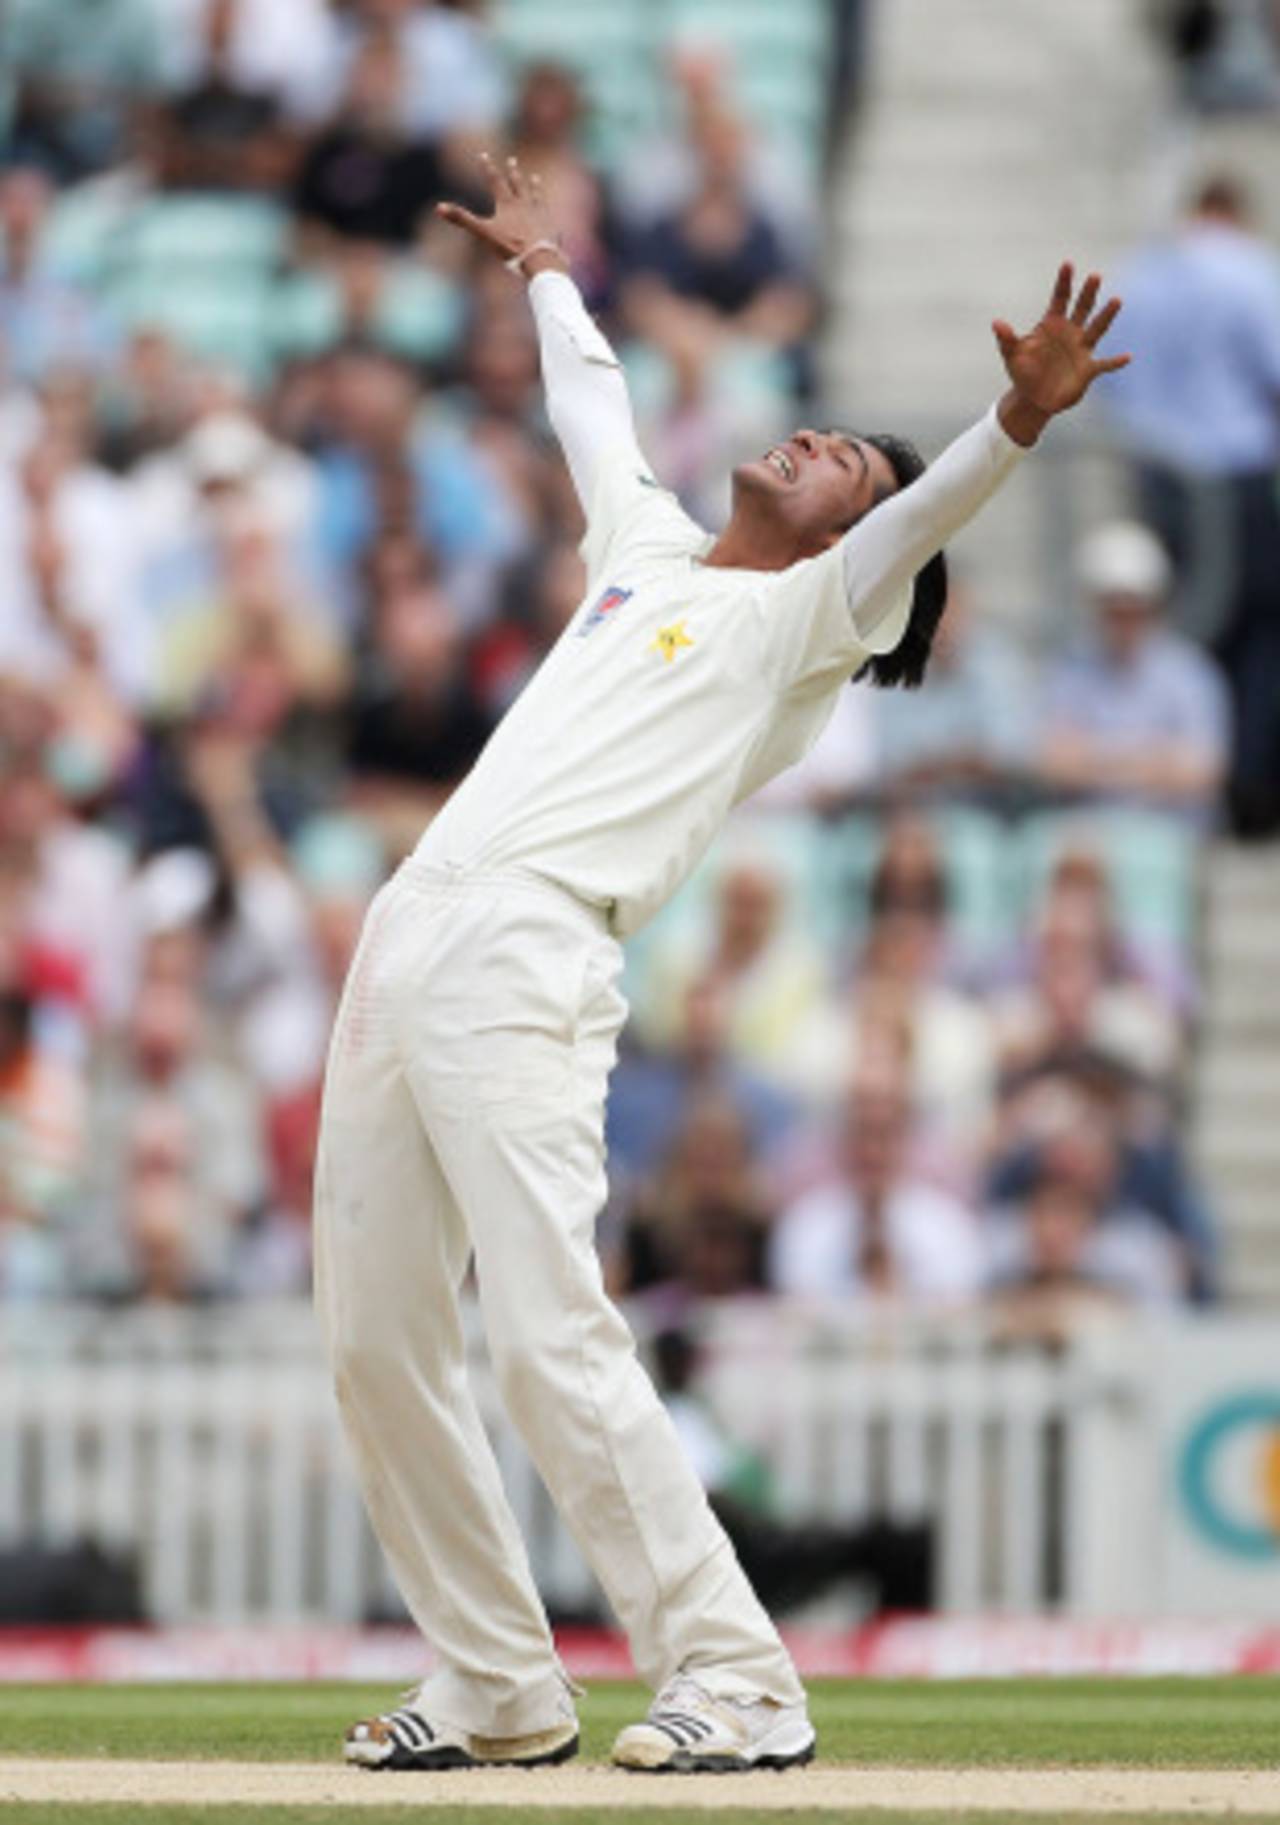 Unbounded joy for Mohammad Amir after he wrapped up England's innings to collect career-best figures, England v Pakistan, 3rd Test, The Oval, August 21, 2010